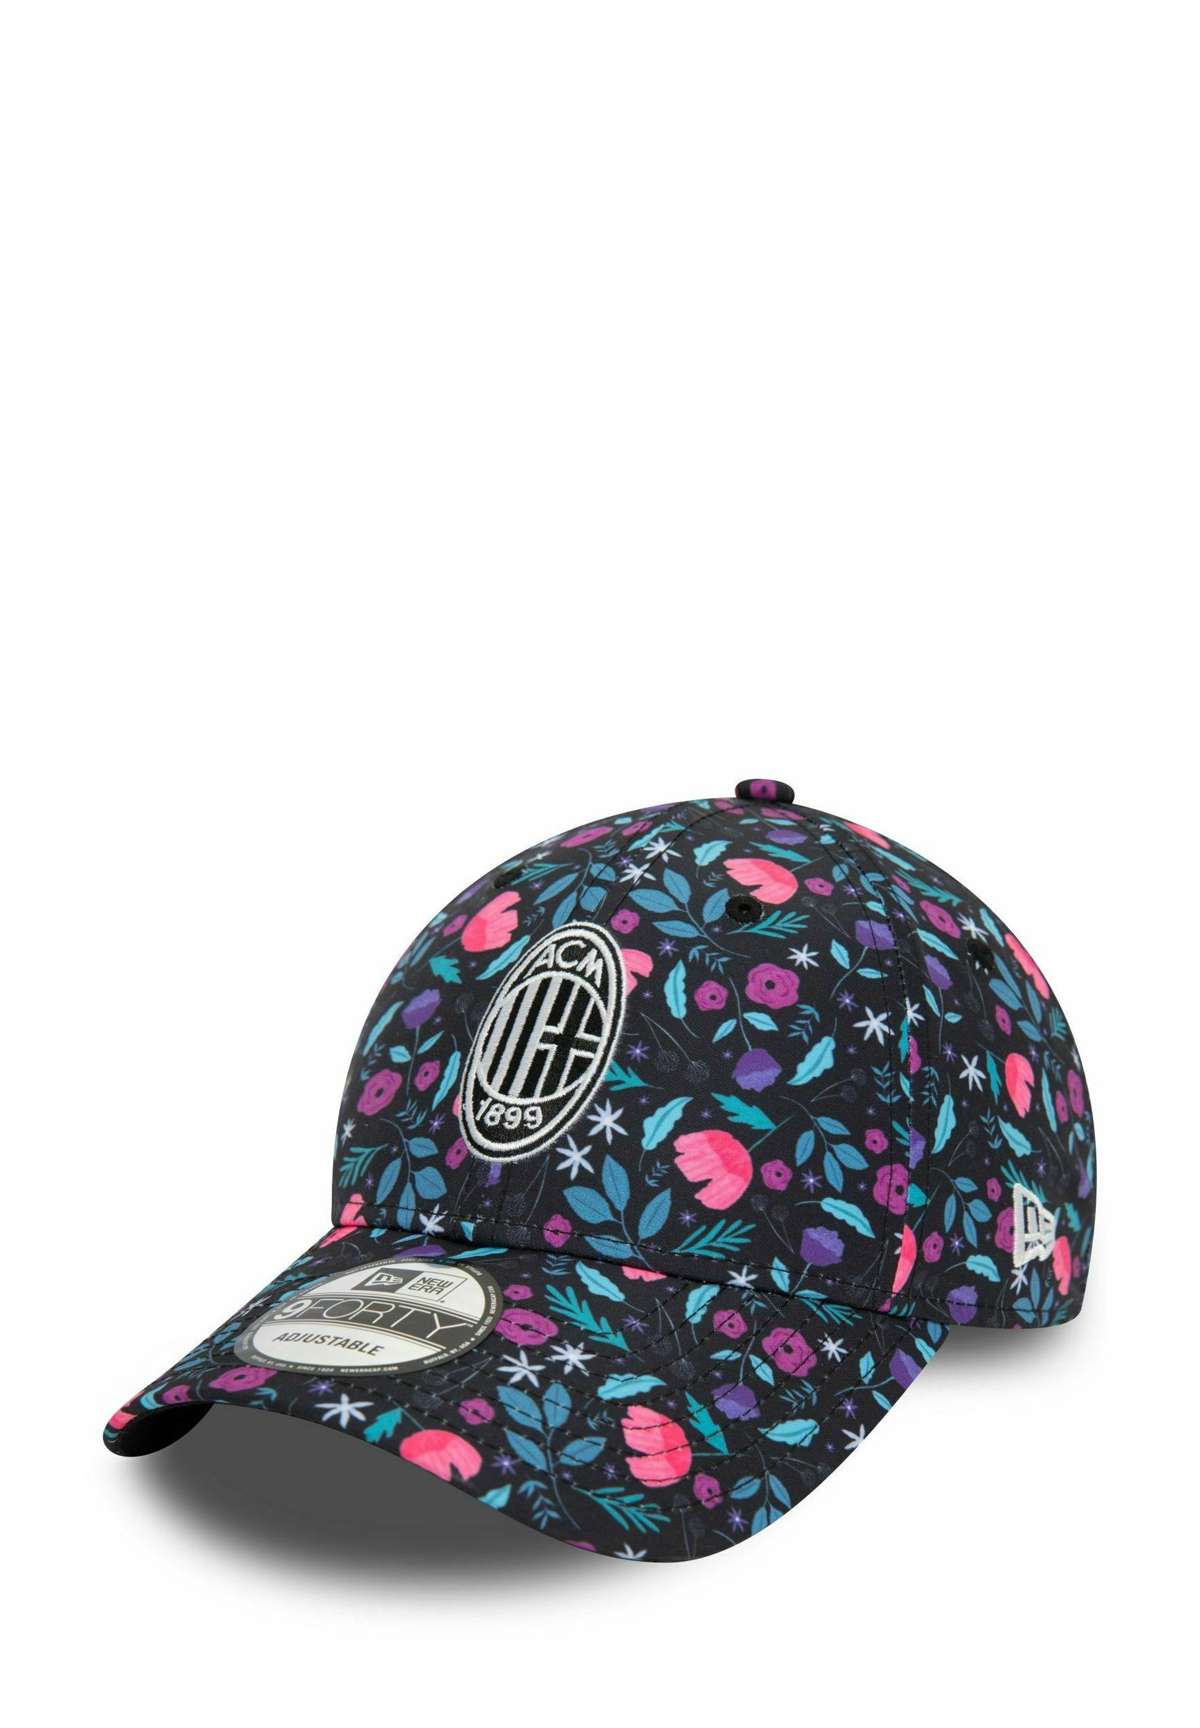 Кепка 9FORTY STRAPBACK AC MAILAND FLORAL